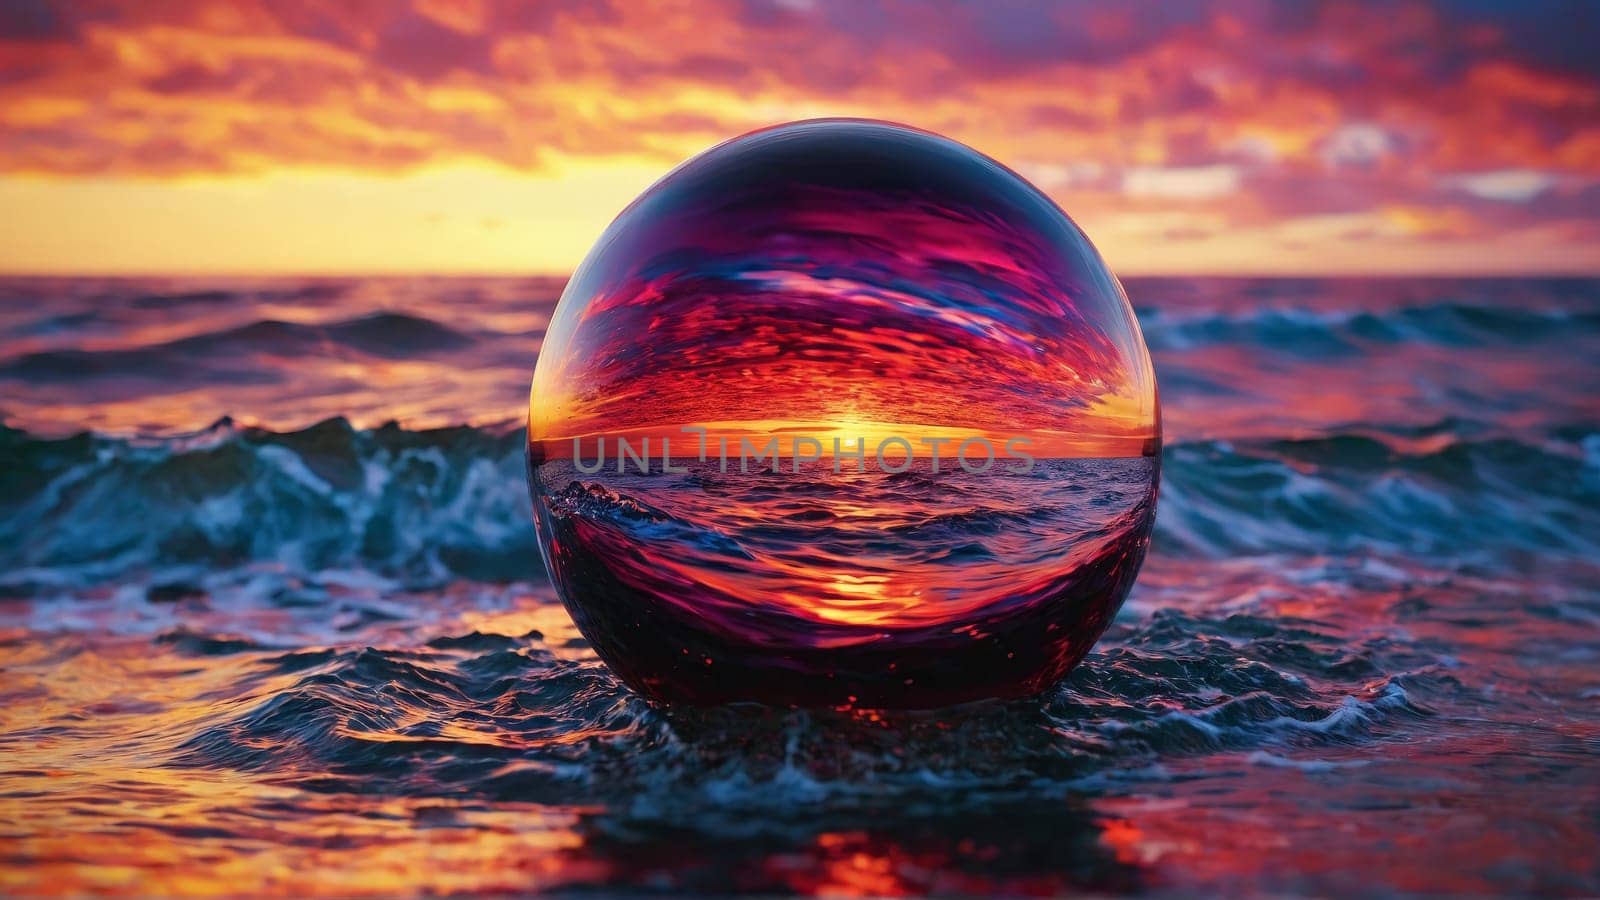 Pinot noir orb reflecting fiery clouds above serene ocean uncluttered composition commercial beverage shot Abstract background by panophotograph